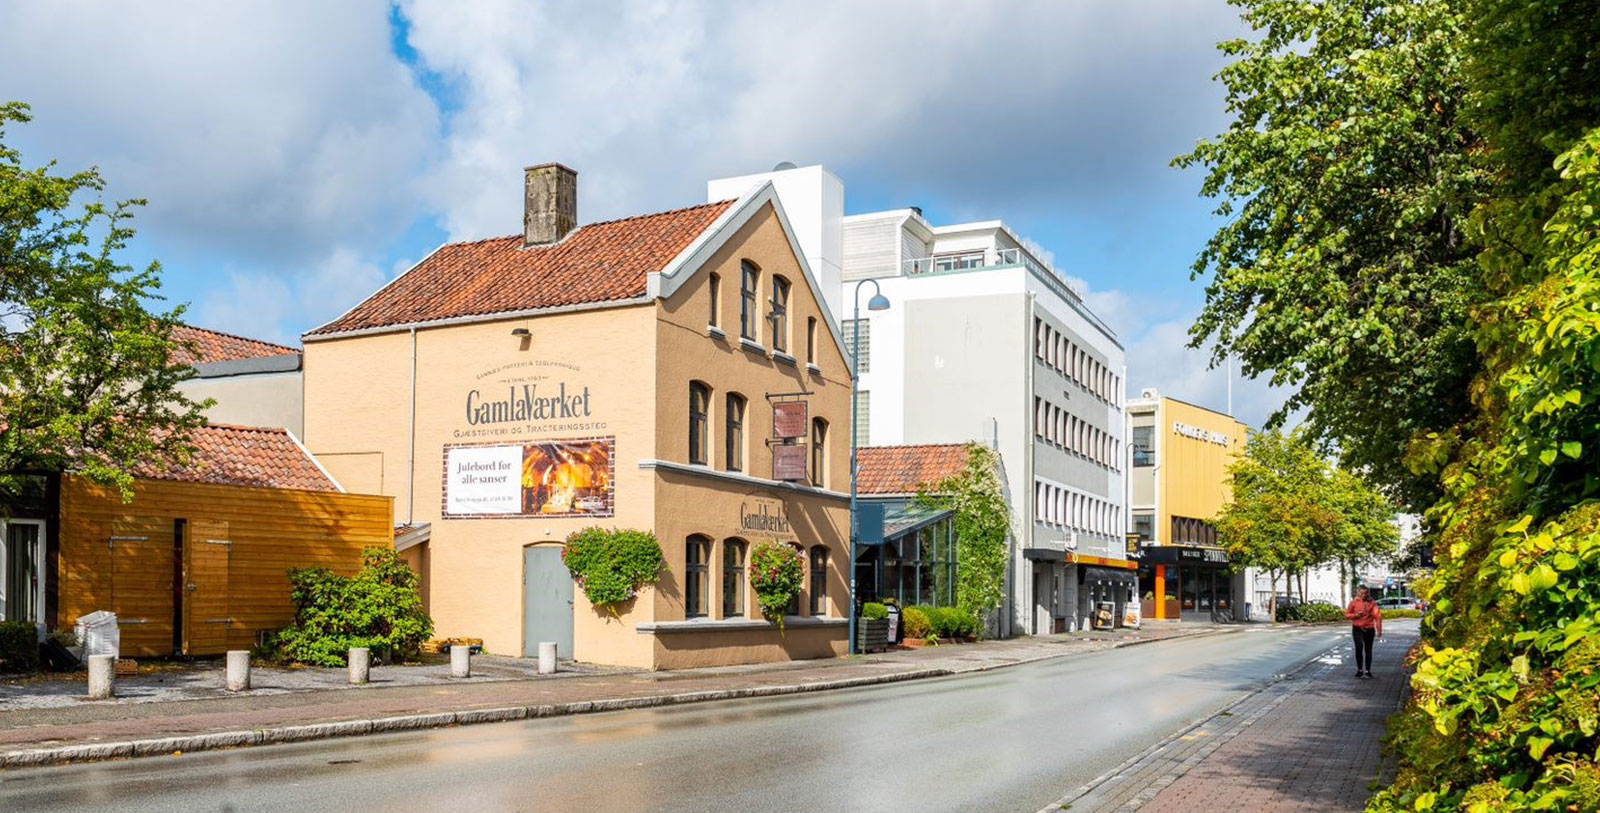 Image of Exterior, Gamla Værket, 1793, Member of Historic Hotels Worldwide, Sandnes, Norway, Special Offers, Discounted Rates, Families, Romantic Escape, Honeymoons, Anniversaries, Reunions